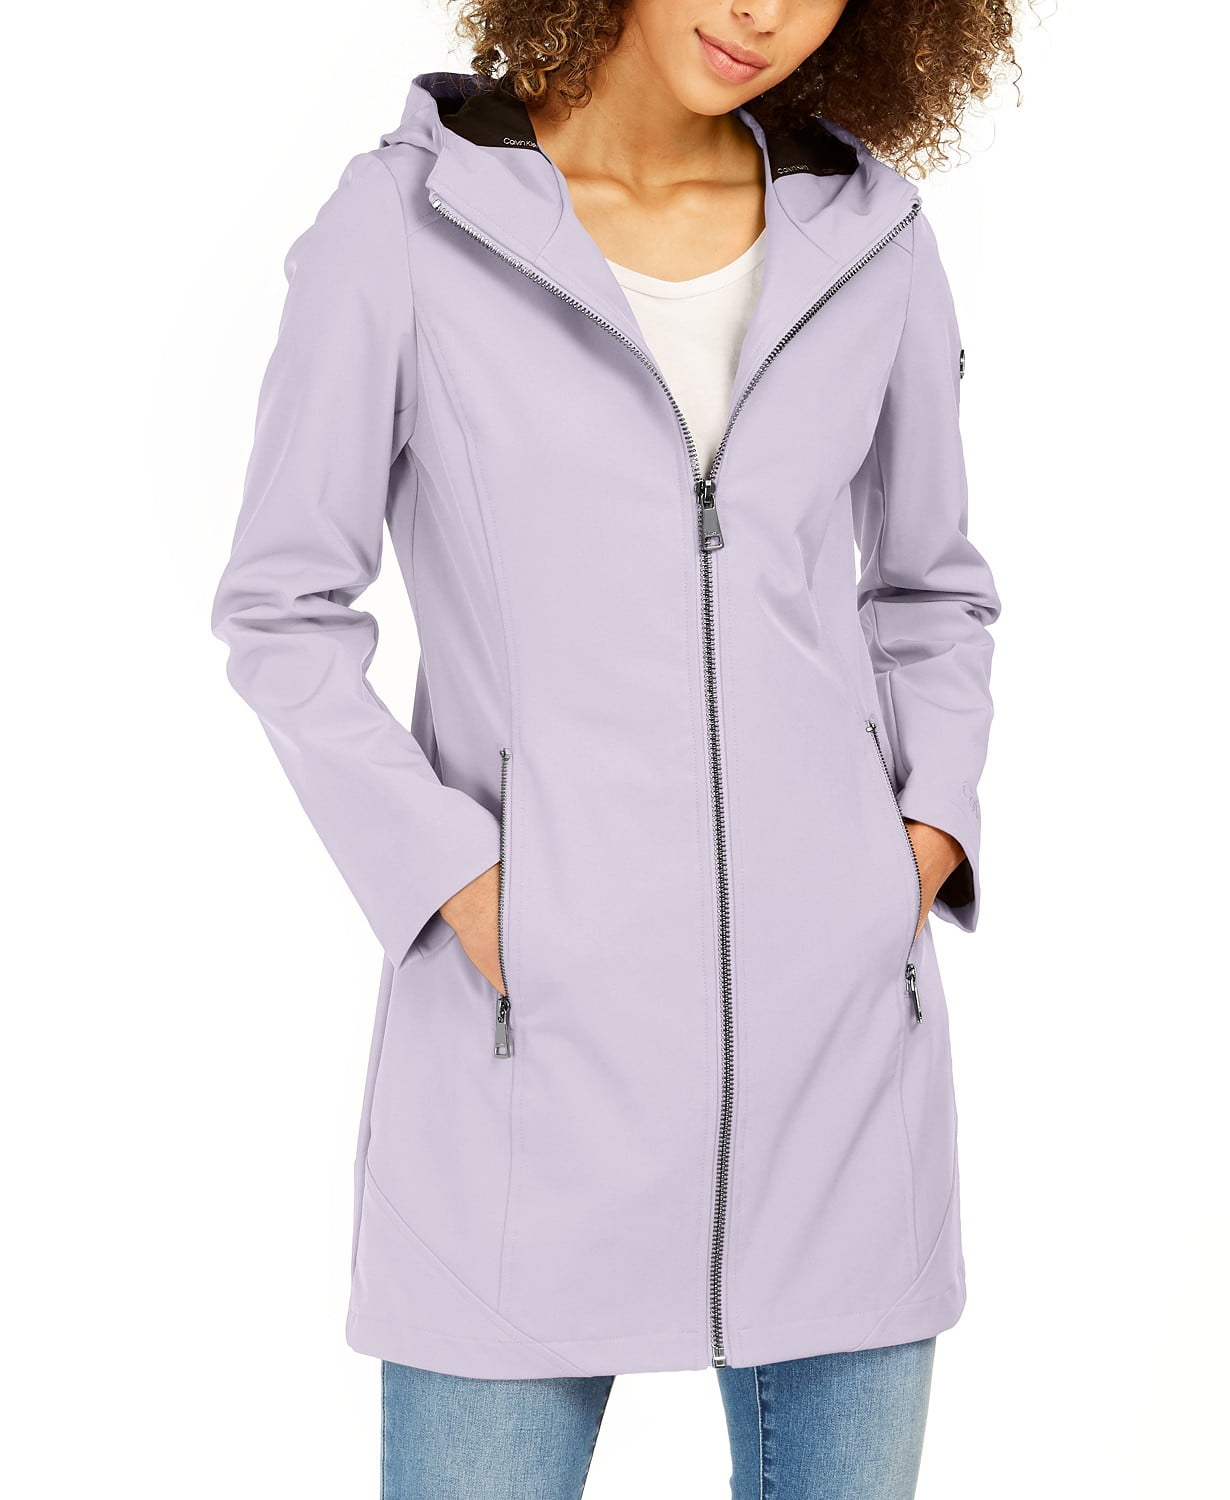 www.couturepoint.com-calvin-klein-womens-lavender-hooded-water-resistant-raincoat